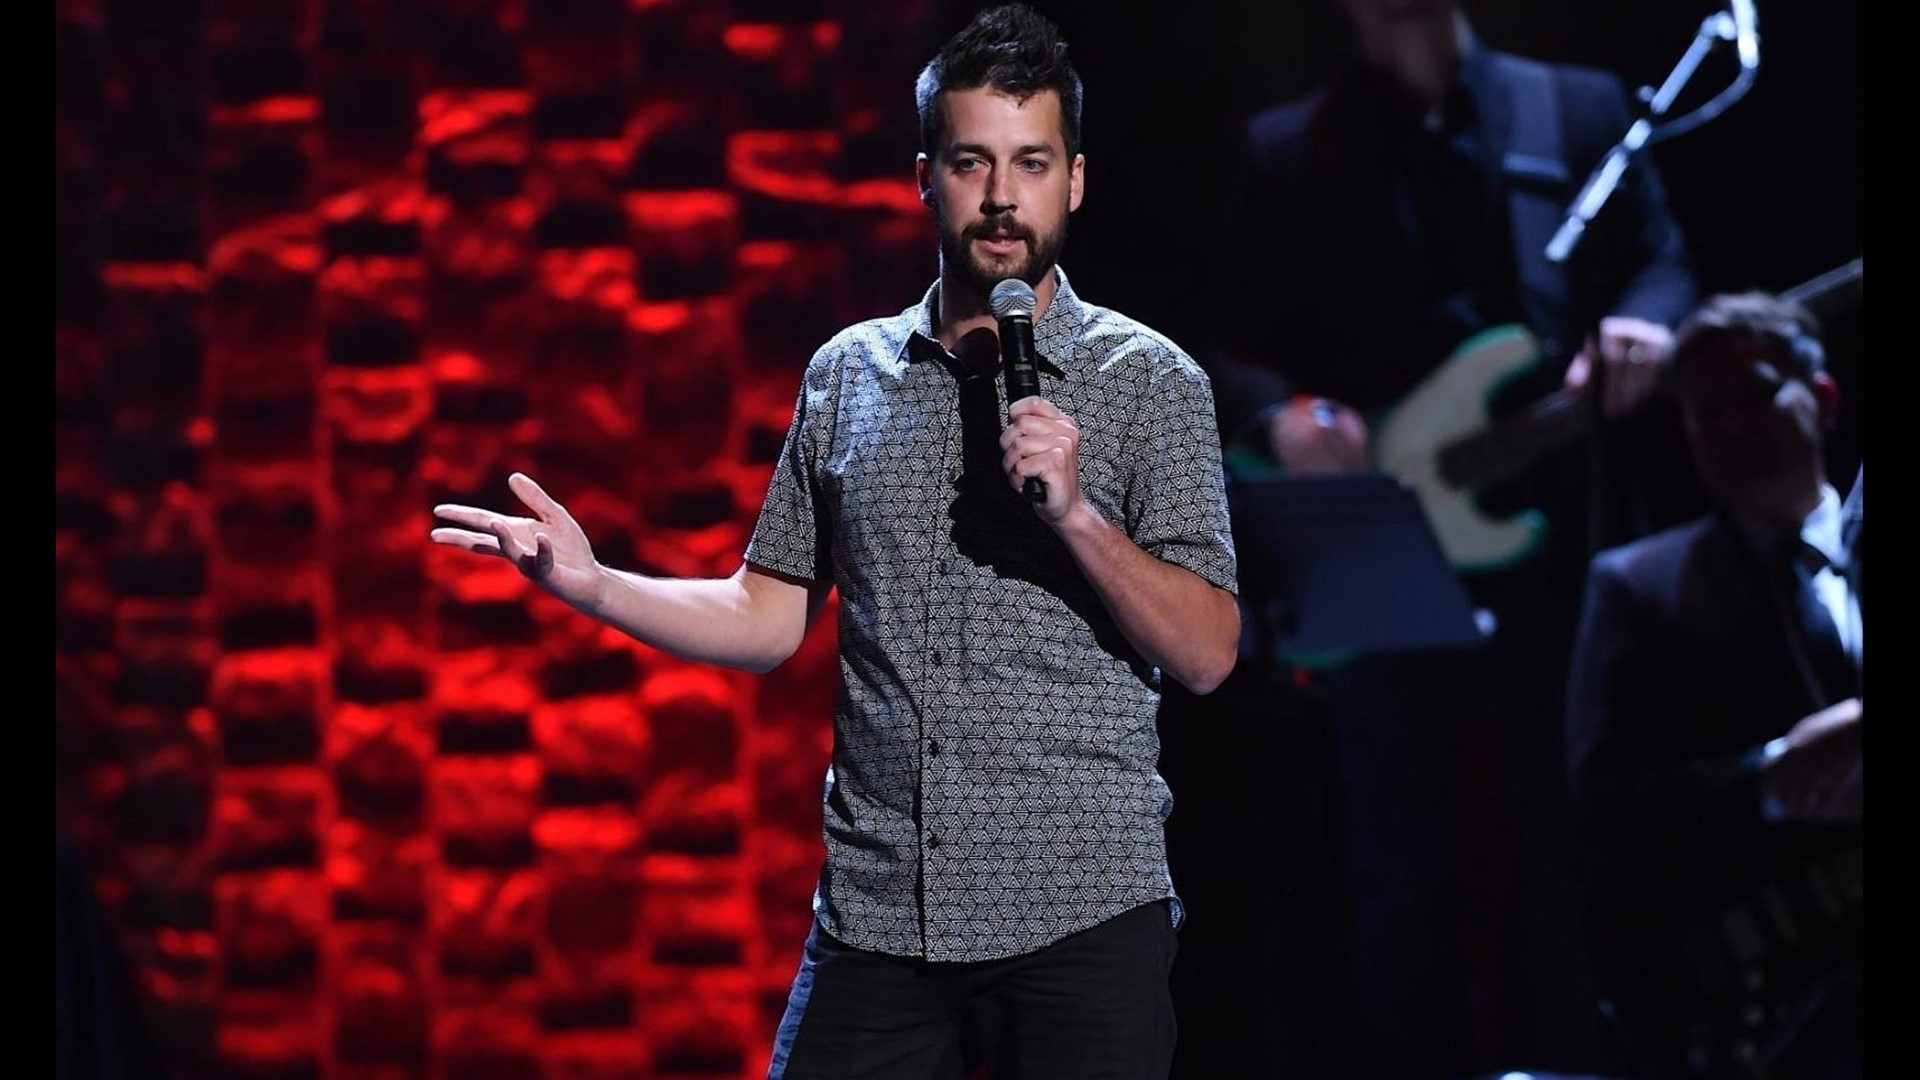 Watch Christian Comedian John Crist Speaks Out After 8 Month Hiatus